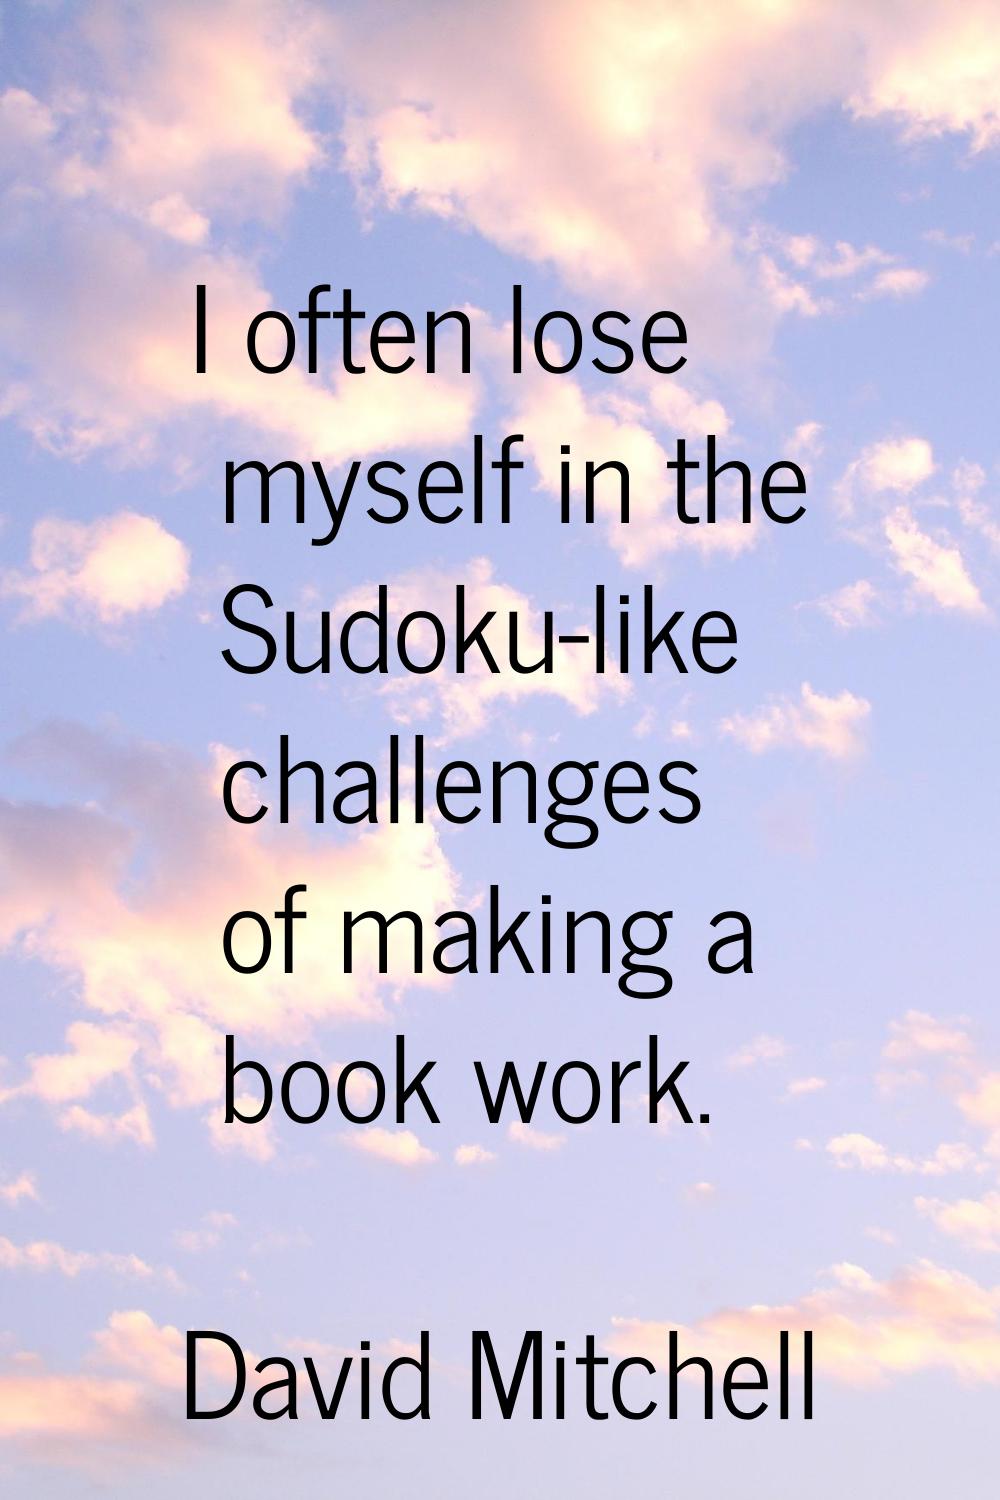 I often lose myself in the Sudoku-like challenges of making a book work.